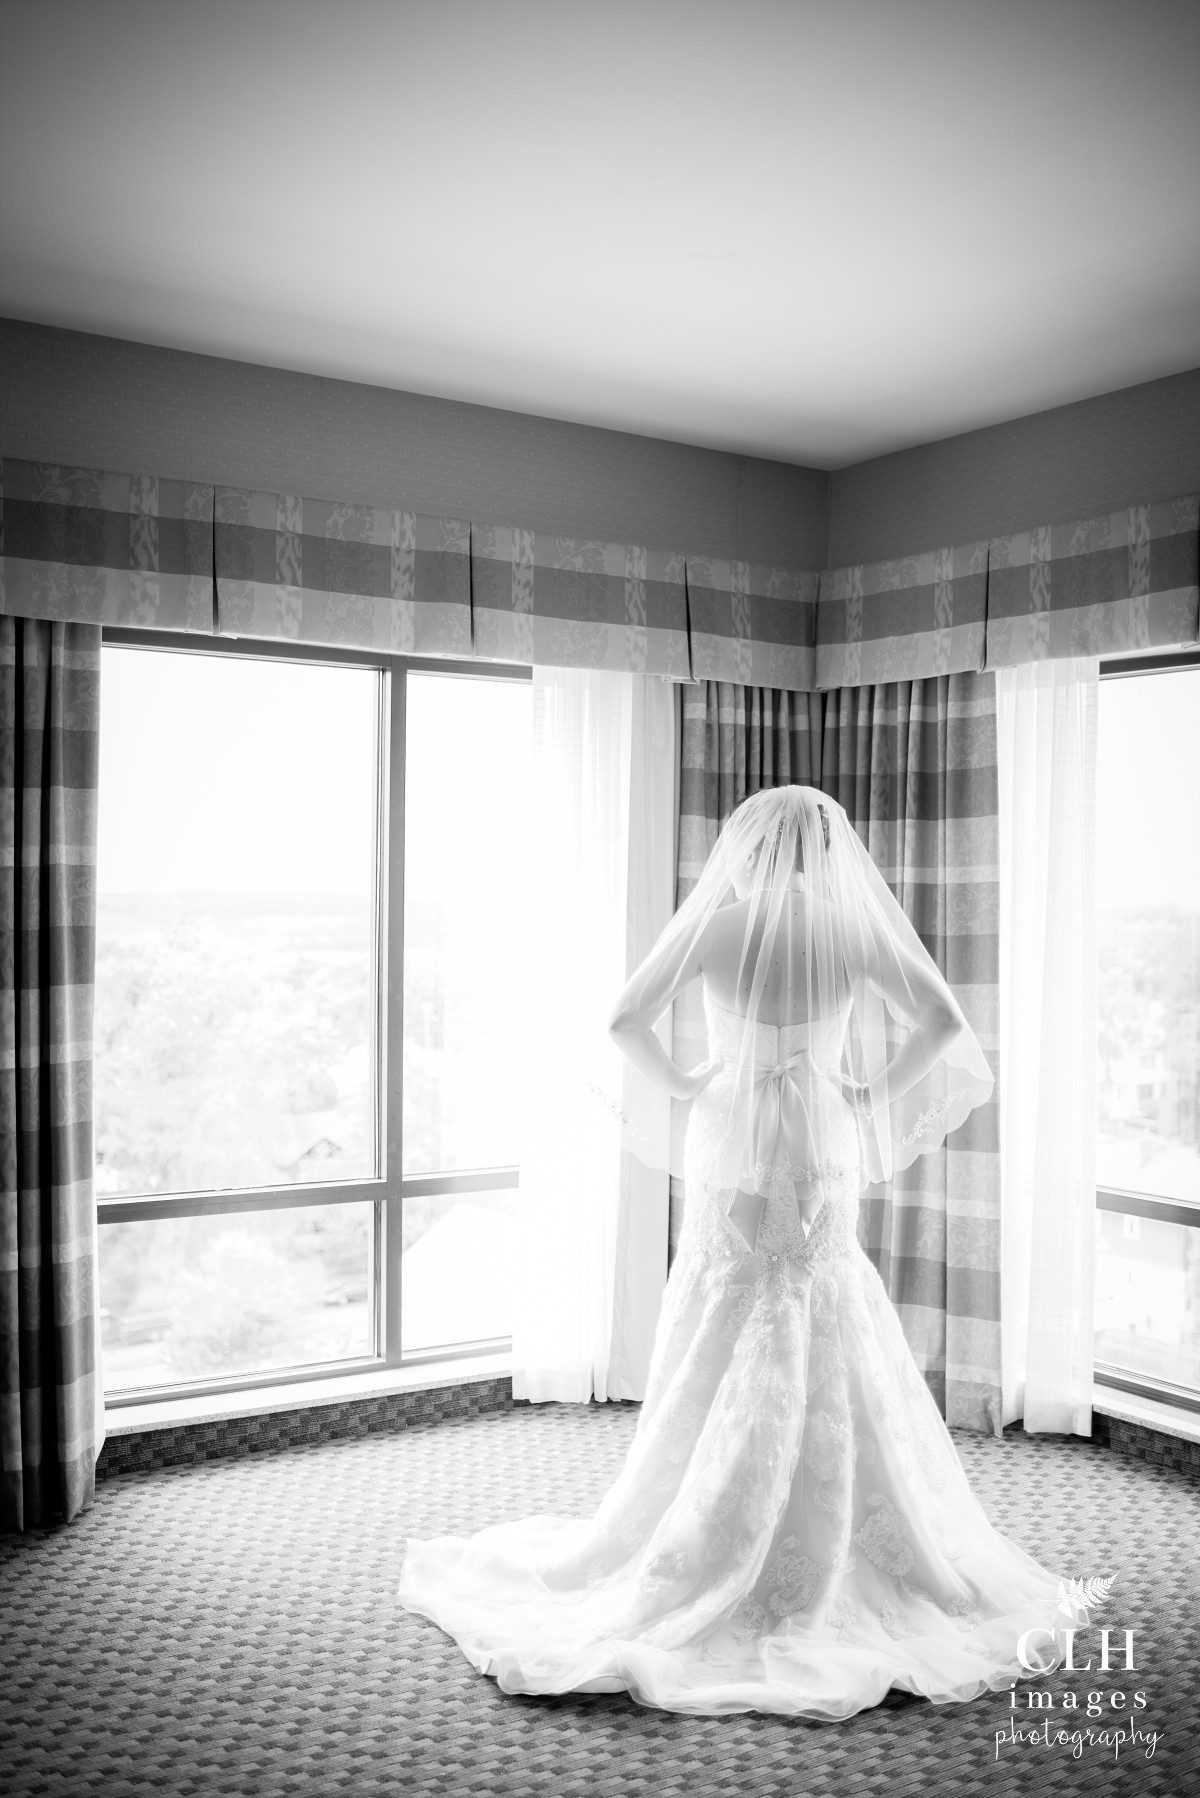 clh-images-photography-revolution-hall-wedding-troy-ny-wedding-albany-wedding-photography-troy-wedding-photography-42